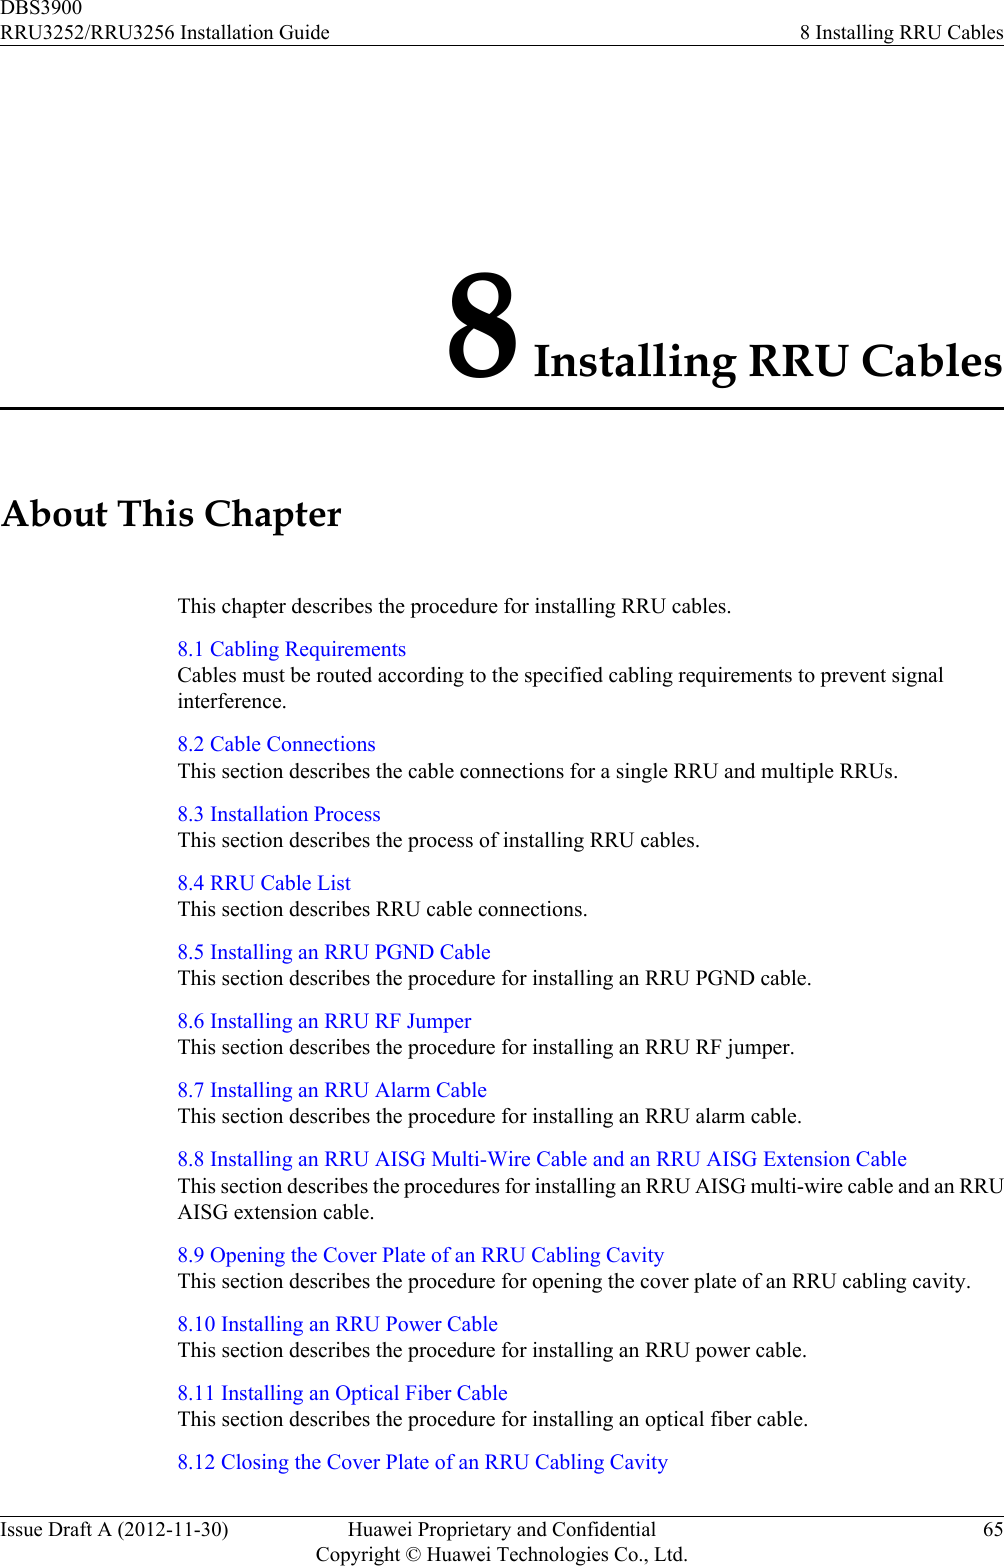 8 Installing RRU CablesAbout This ChapterThis chapter describes the procedure for installing RRU cables.8.1 Cabling RequirementsCables must be routed according to the specified cabling requirements to prevent signalinterference.8.2 Cable ConnectionsThis section describes the cable connections for a single RRU and multiple RRUs.8.3 Installation ProcessThis section describes the process of installing RRU cables.8.4 RRU Cable ListThis section describes RRU cable connections.8.5 Installing an RRU PGND CableThis section describes the procedure for installing an RRU PGND cable.8.6 Installing an RRU RF JumperThis section describes the procedure for installing an RRU RF jumper.8.7 Installing an RRU Alarm CableThis section describes the procedure for installing an RRU alarm cable.8.8 Installing an RRU AISG Multi-Wire Cable and an RRU AISG Extension CableThis section describes the procedures for installing an RRU AISG multi-wire cable and an RRUAISG extension cable.8.9 Opening the Cover Plate of an RRU Cabling CavityThis section describes the procedure for opening the cover plate of an RRU cabling cavity.8.10 Installing an RRU Power CableThis section describes the procedure for installing an RRU power cable.8.11 Installing an Optical Fiber CableThis section describes the procedure for installing an optical fiber cable.8.12 Closing the Cover Plate of an RRU Cabling CavityDBS3900RRU3252/RRU3256 Installation Guide 8 Installing RRU CablesIssue Draft A (2012-11-30) Huawei Proprietary and ConfidentialCopyright © Huawei Technologies Co., Ltd.65